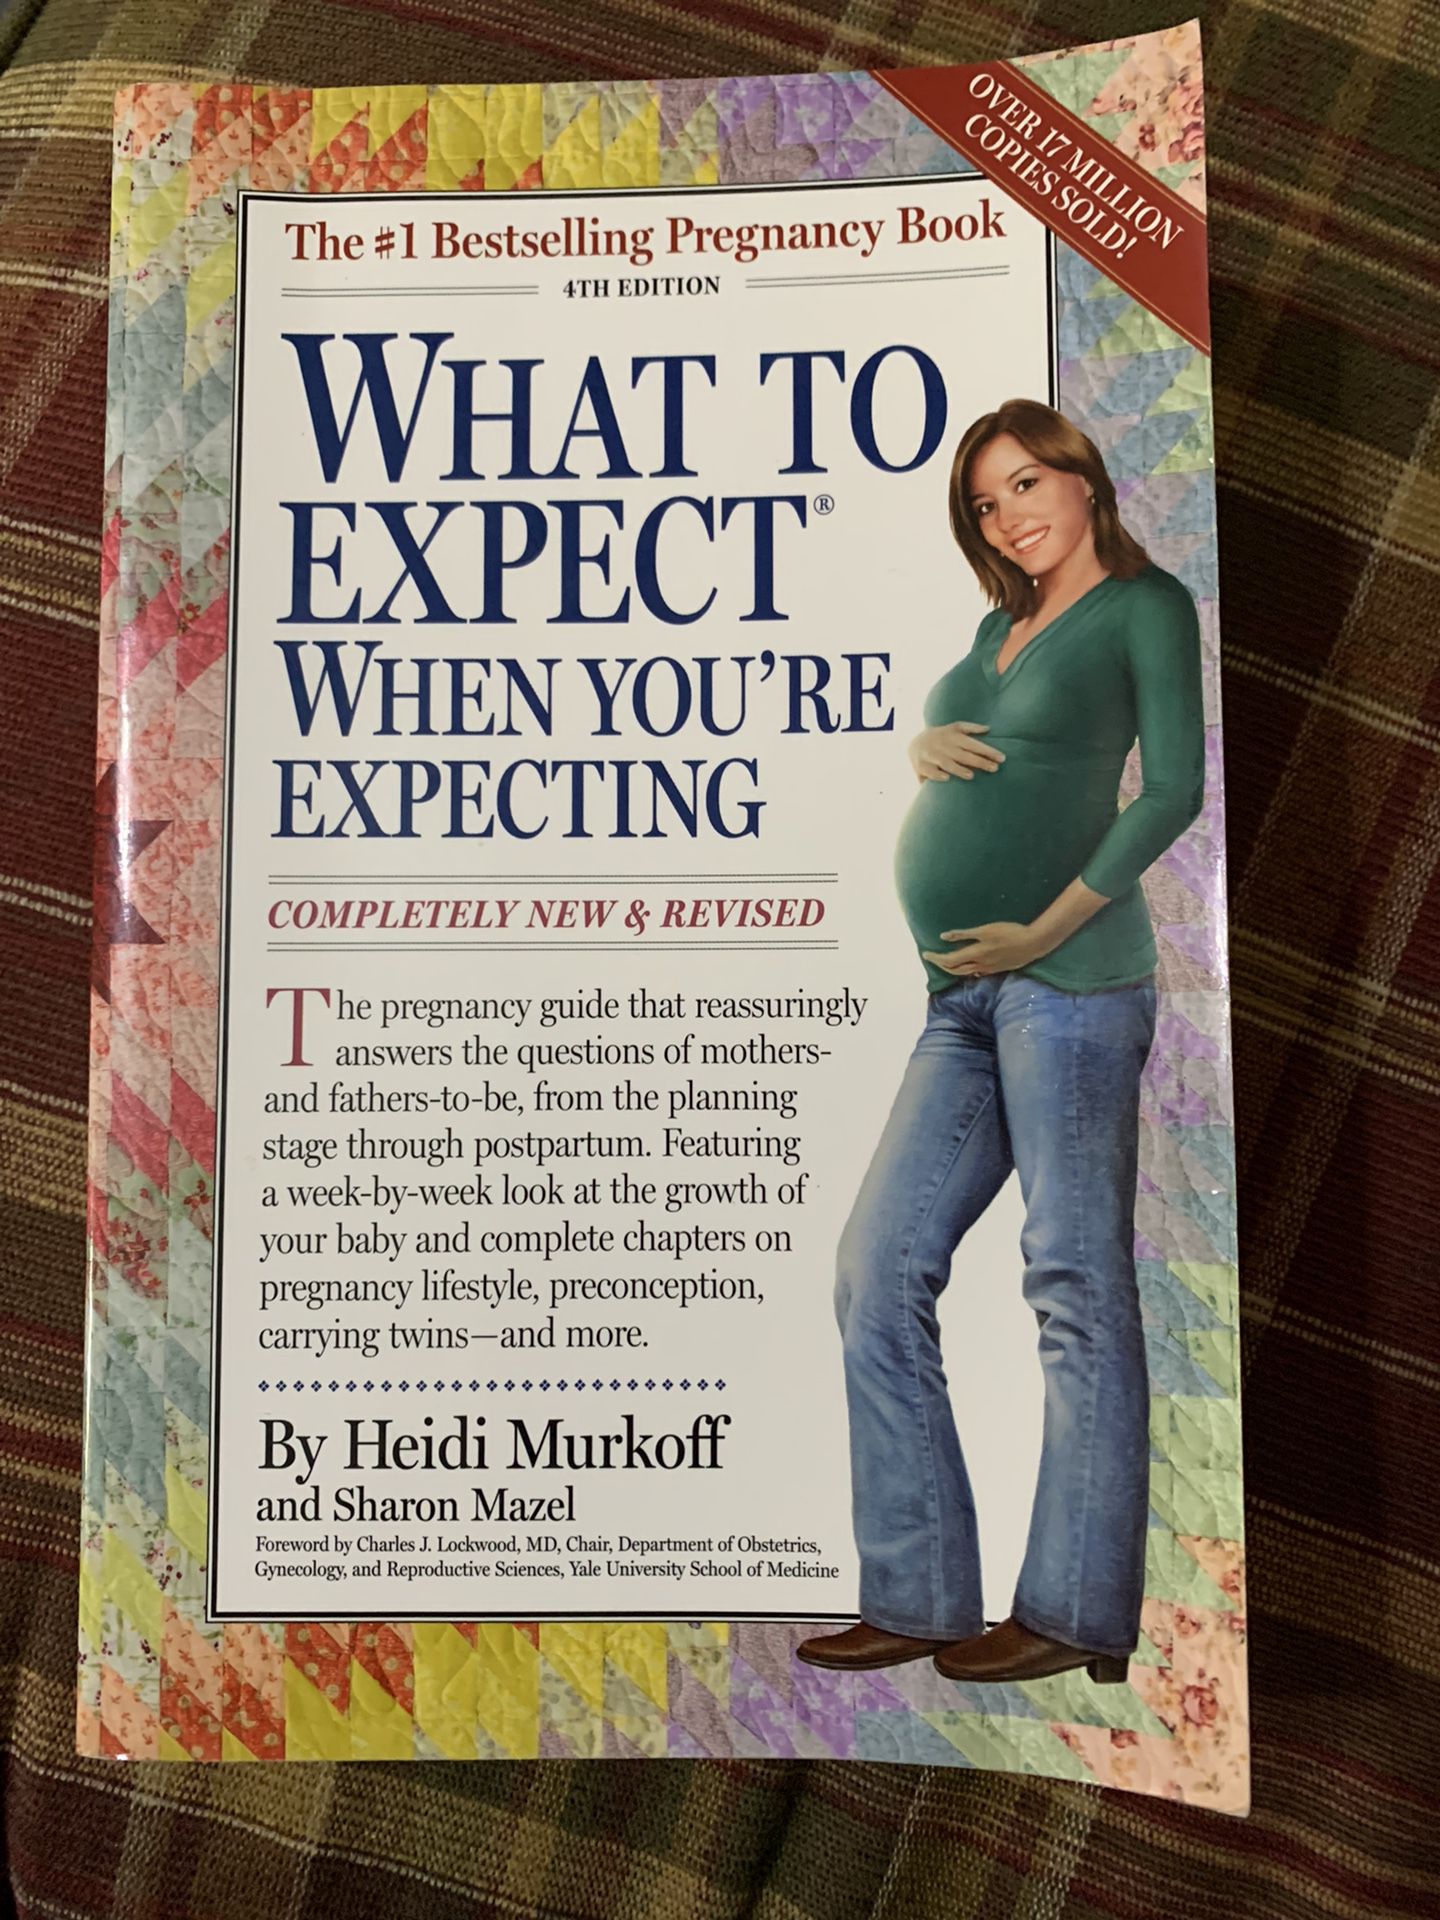 #1 Bestselling Pregnancy Book “What To Expect When You’re Expecting “